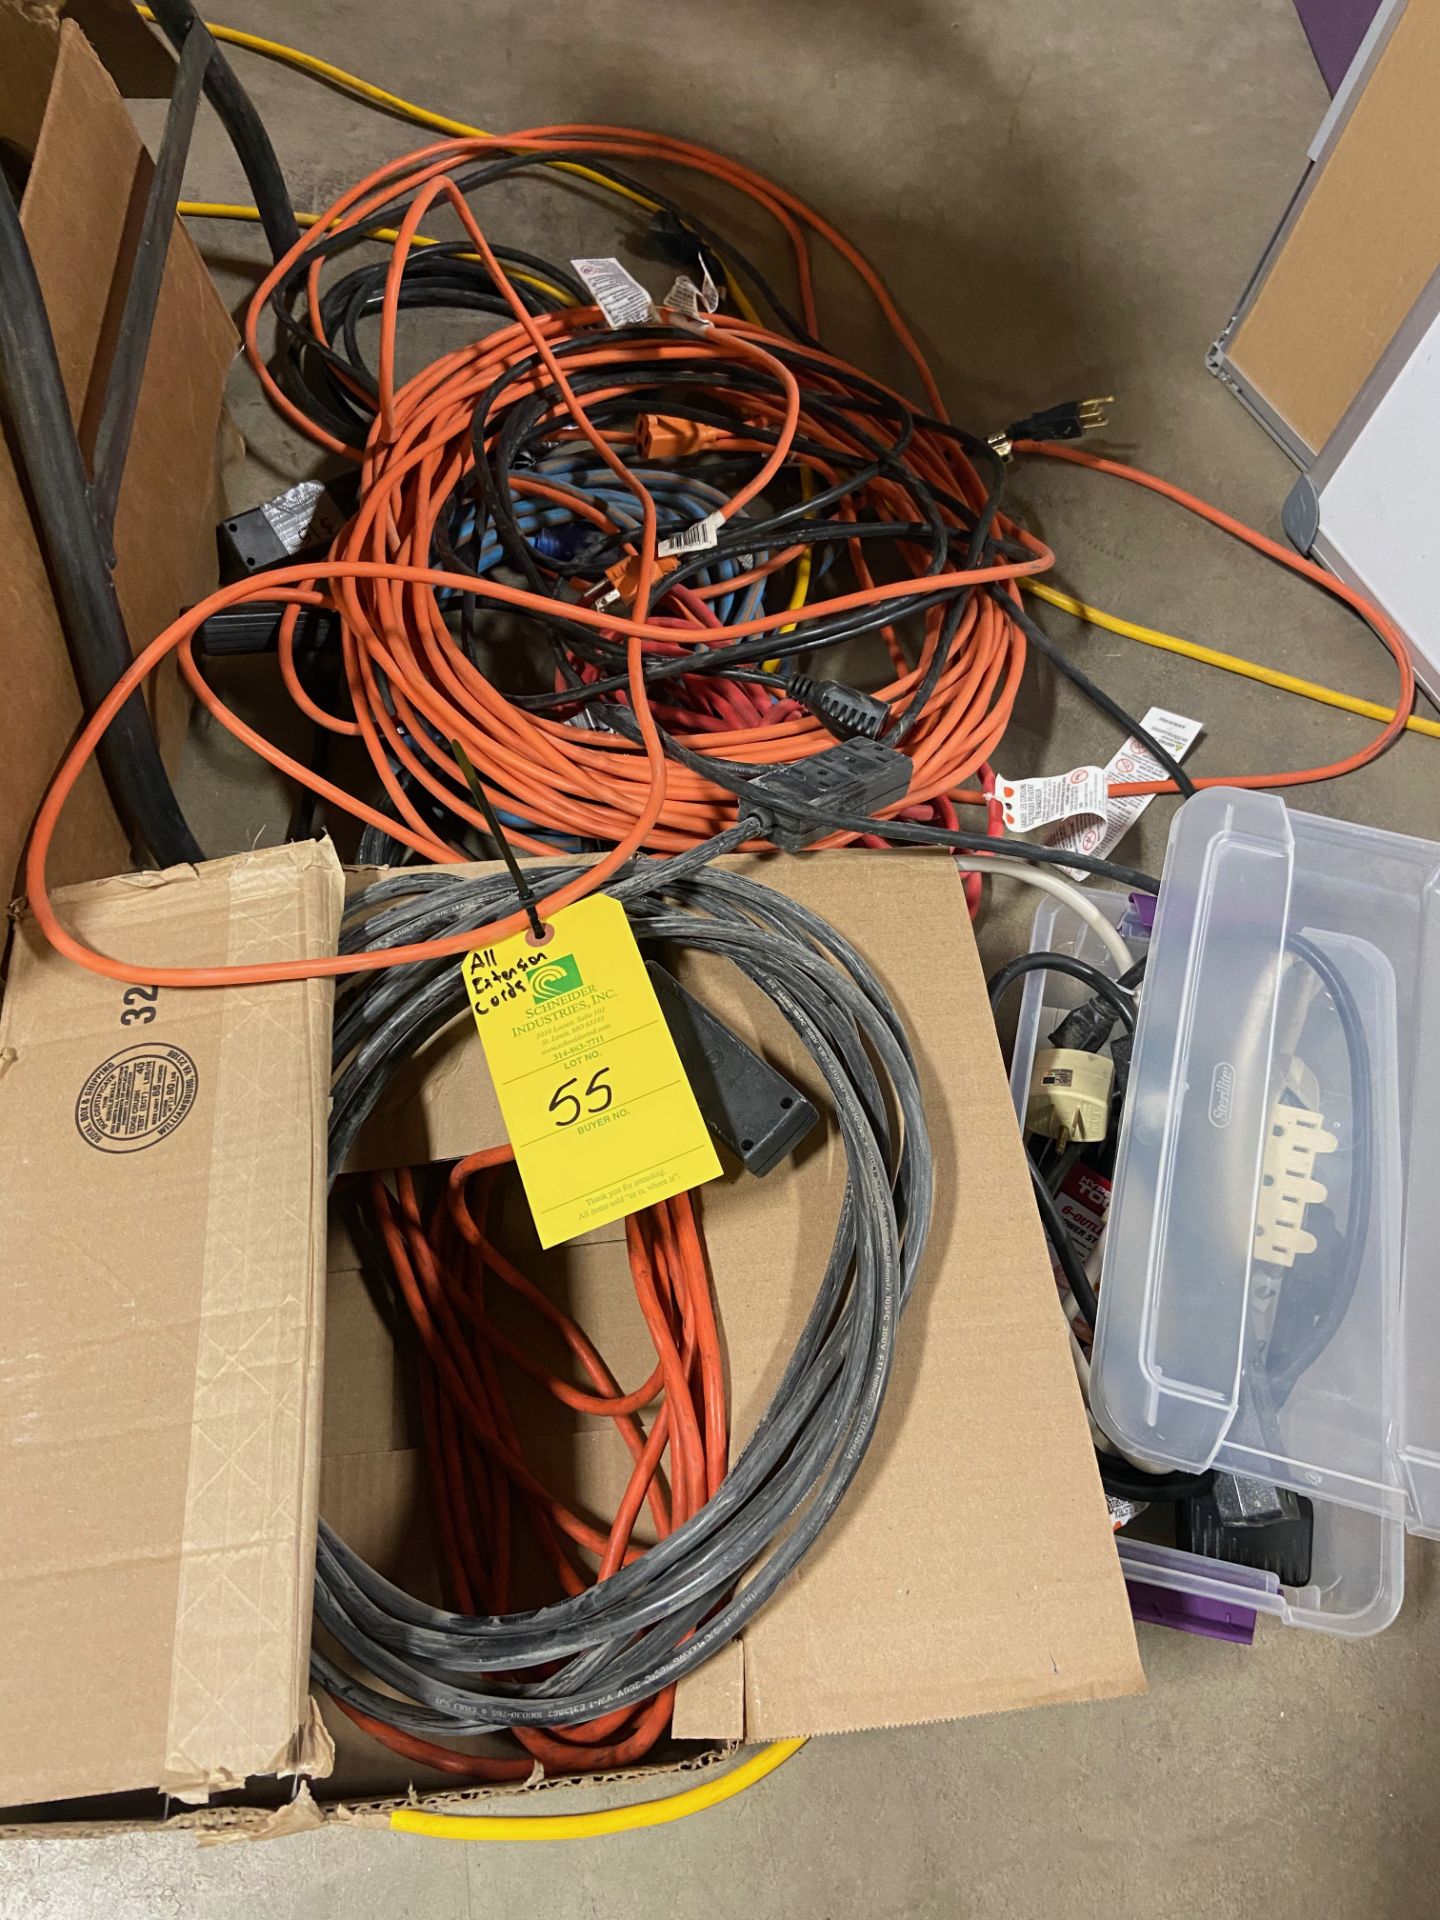 Extension Cords (All Pictured), Rigging Fee: $10 - Image 2 of 4